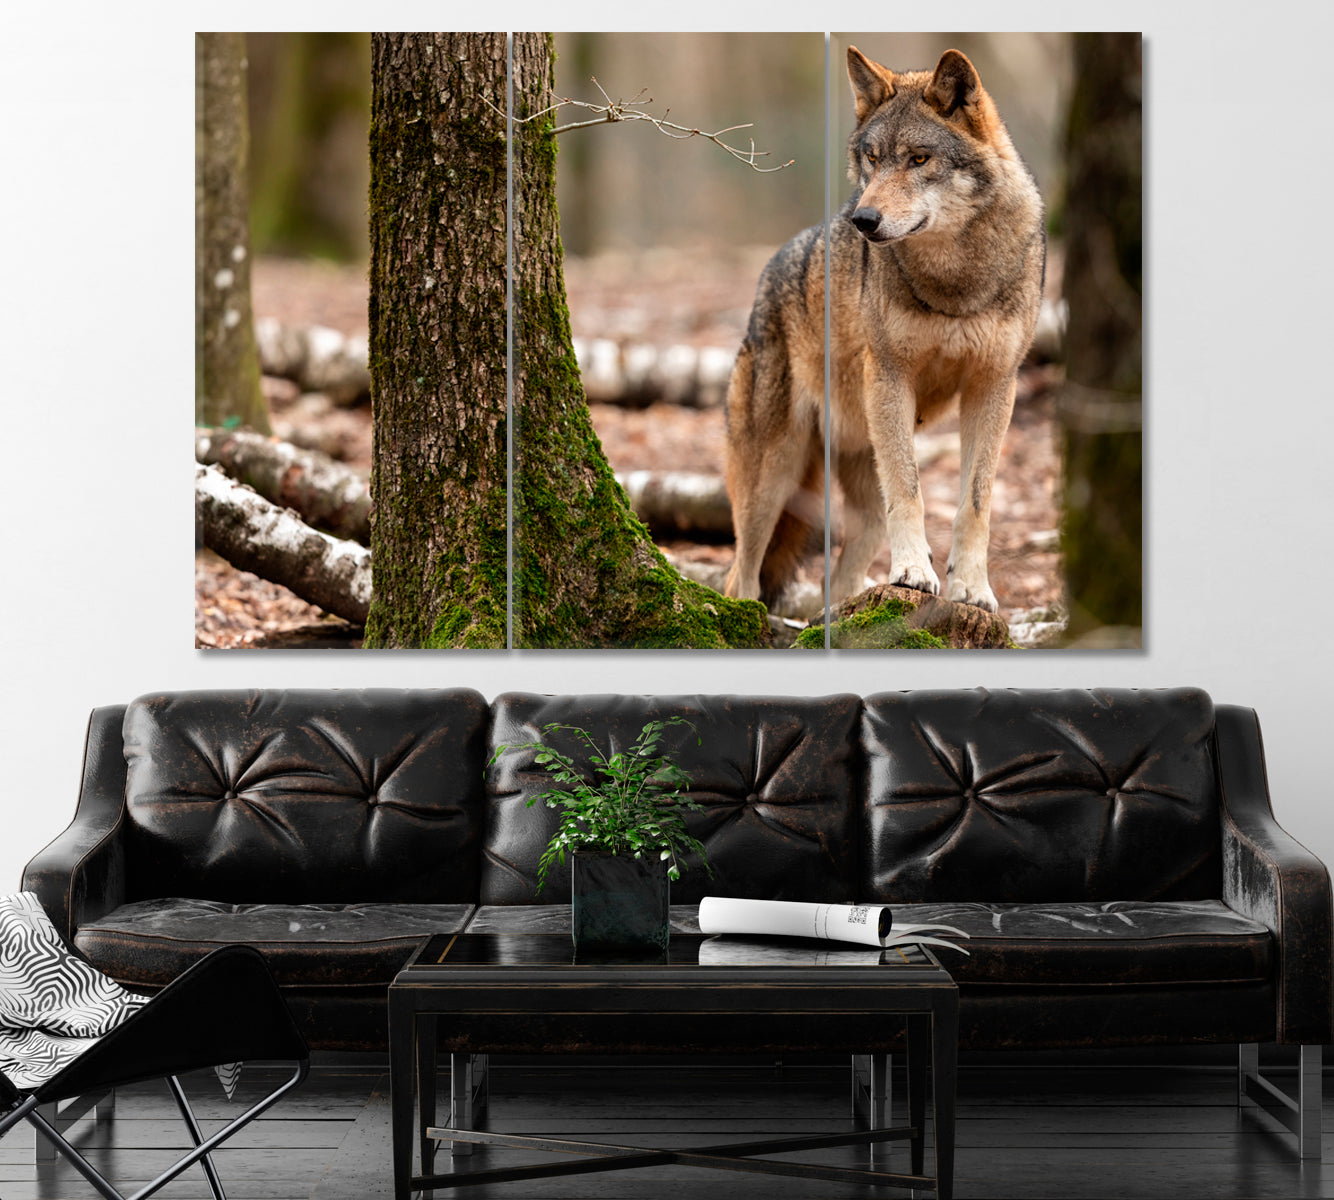 Angry Gray Wolf Canvas Print ArtLexy 3 Panels 36"x24" inches 